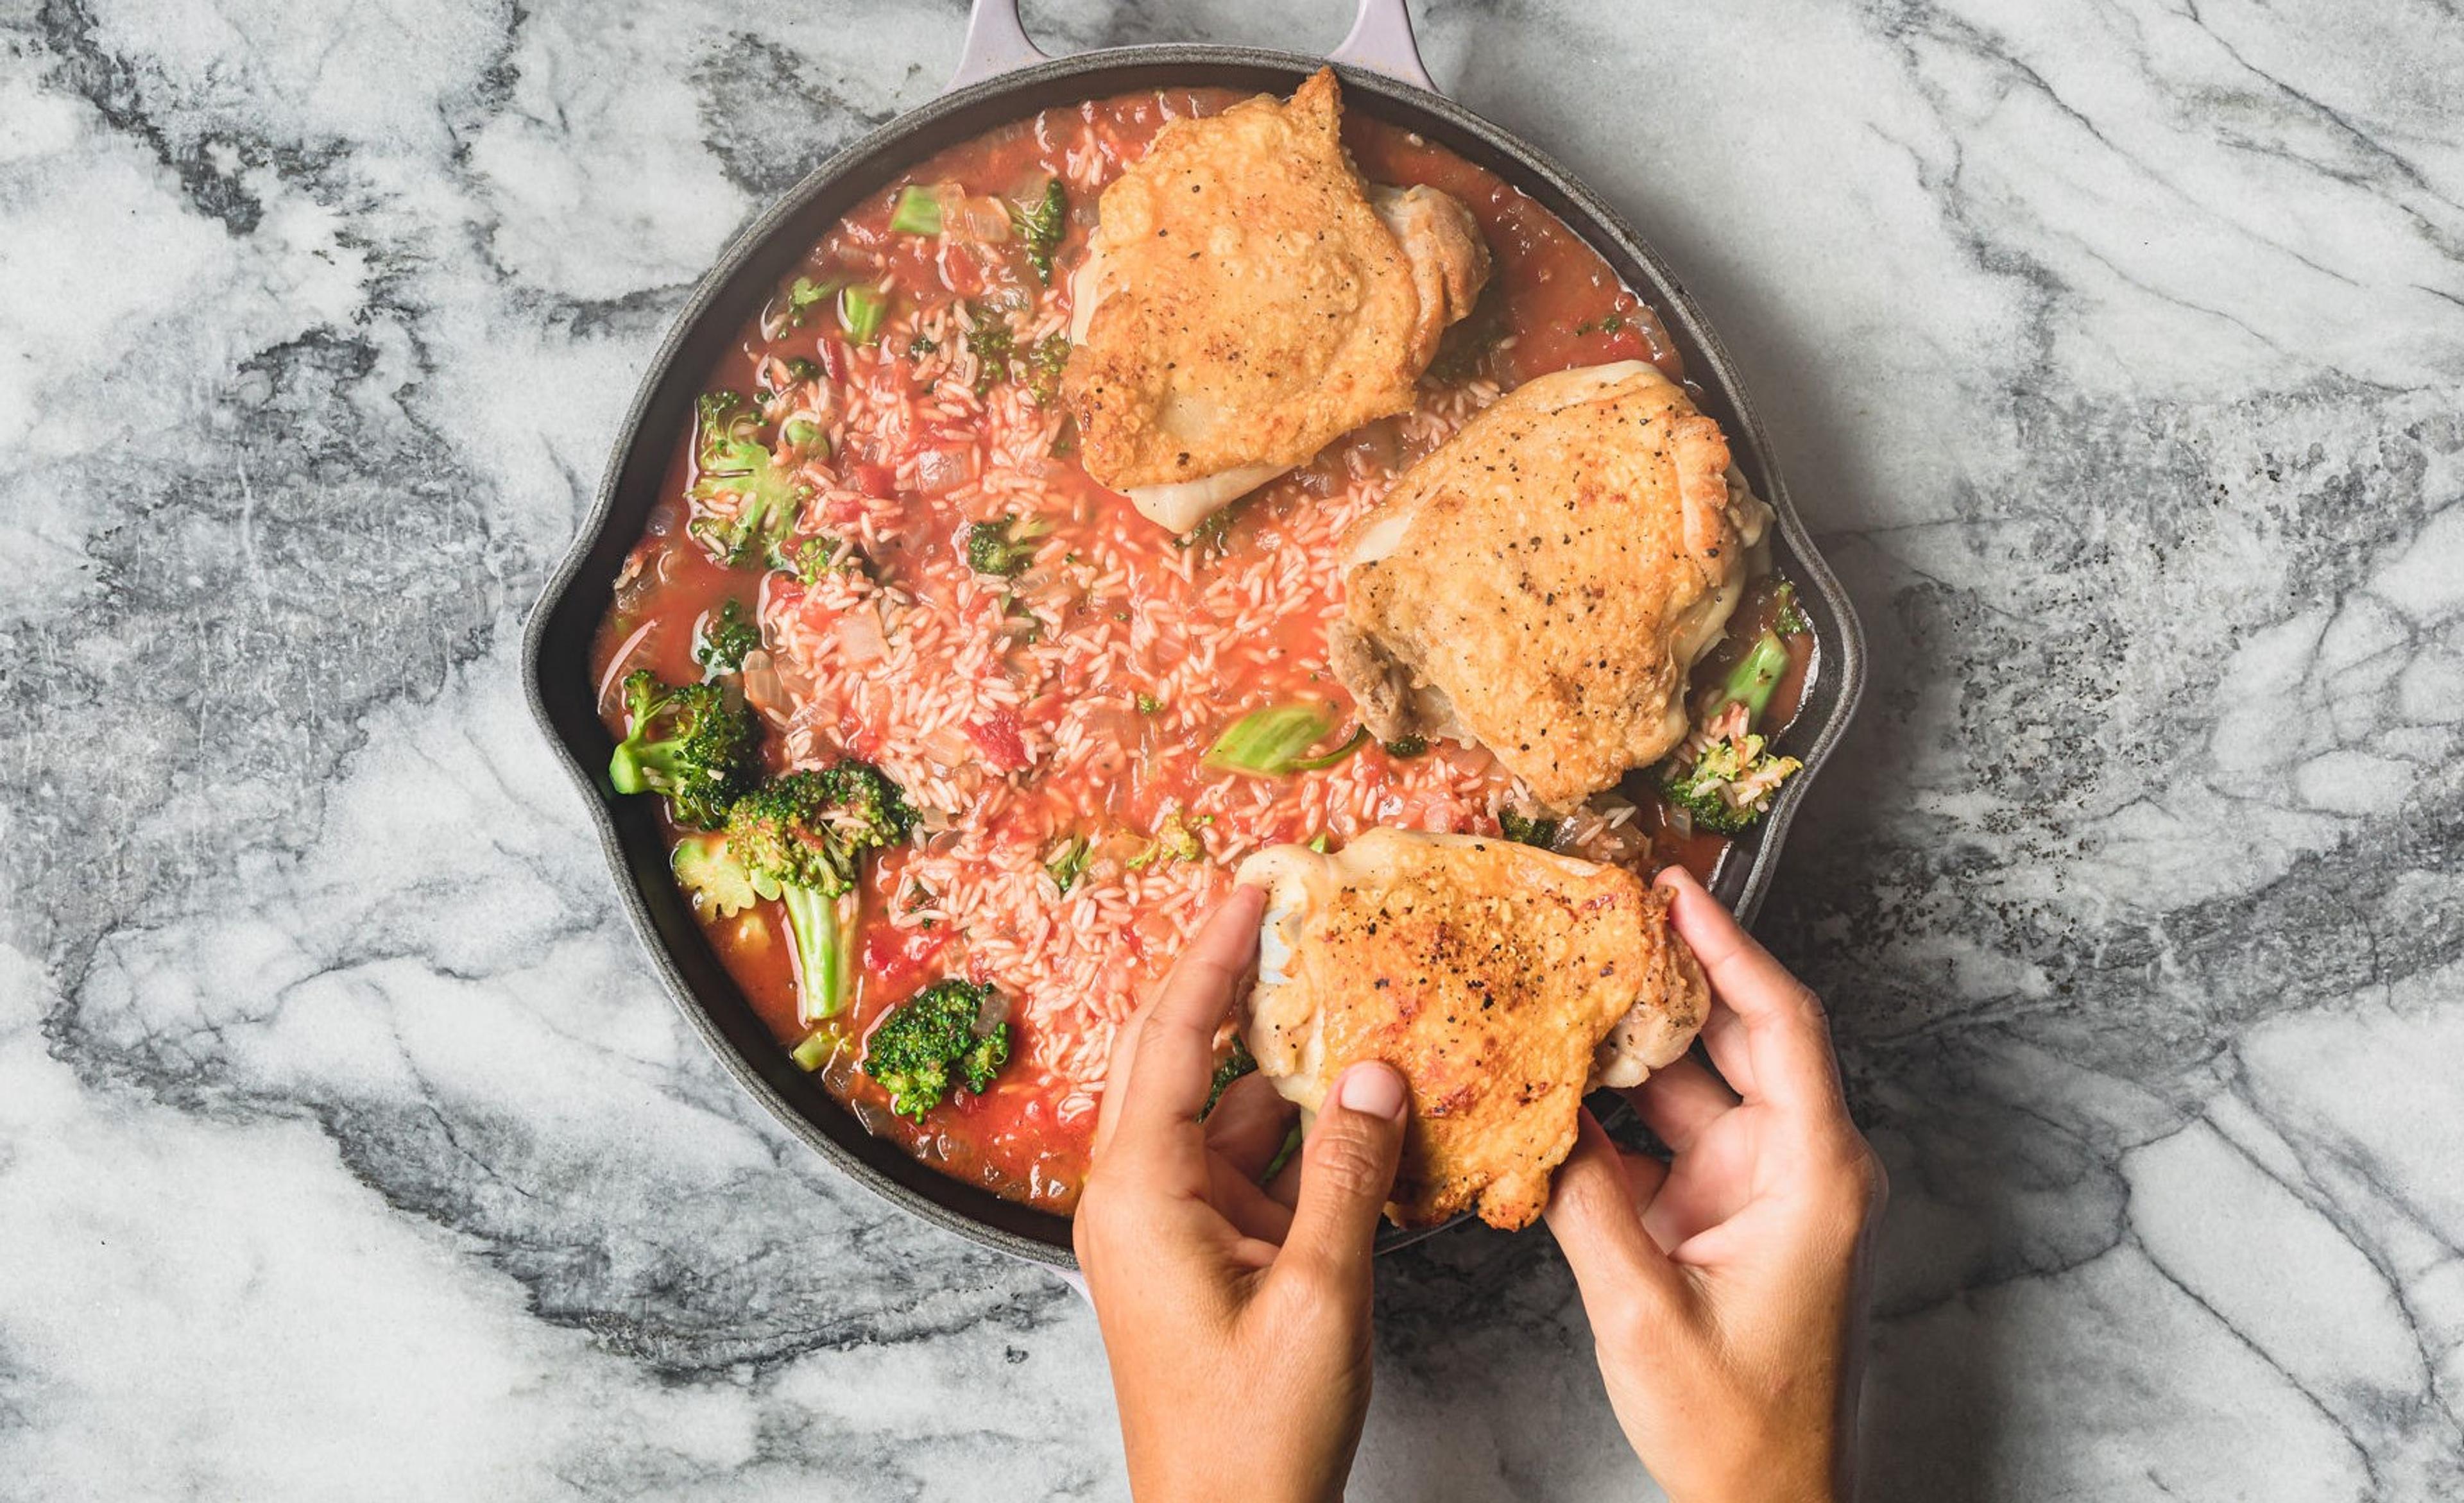 One-pan dinner, Tomato Chicken with Rice and Broccoli. Photo by Daniela Gerson.